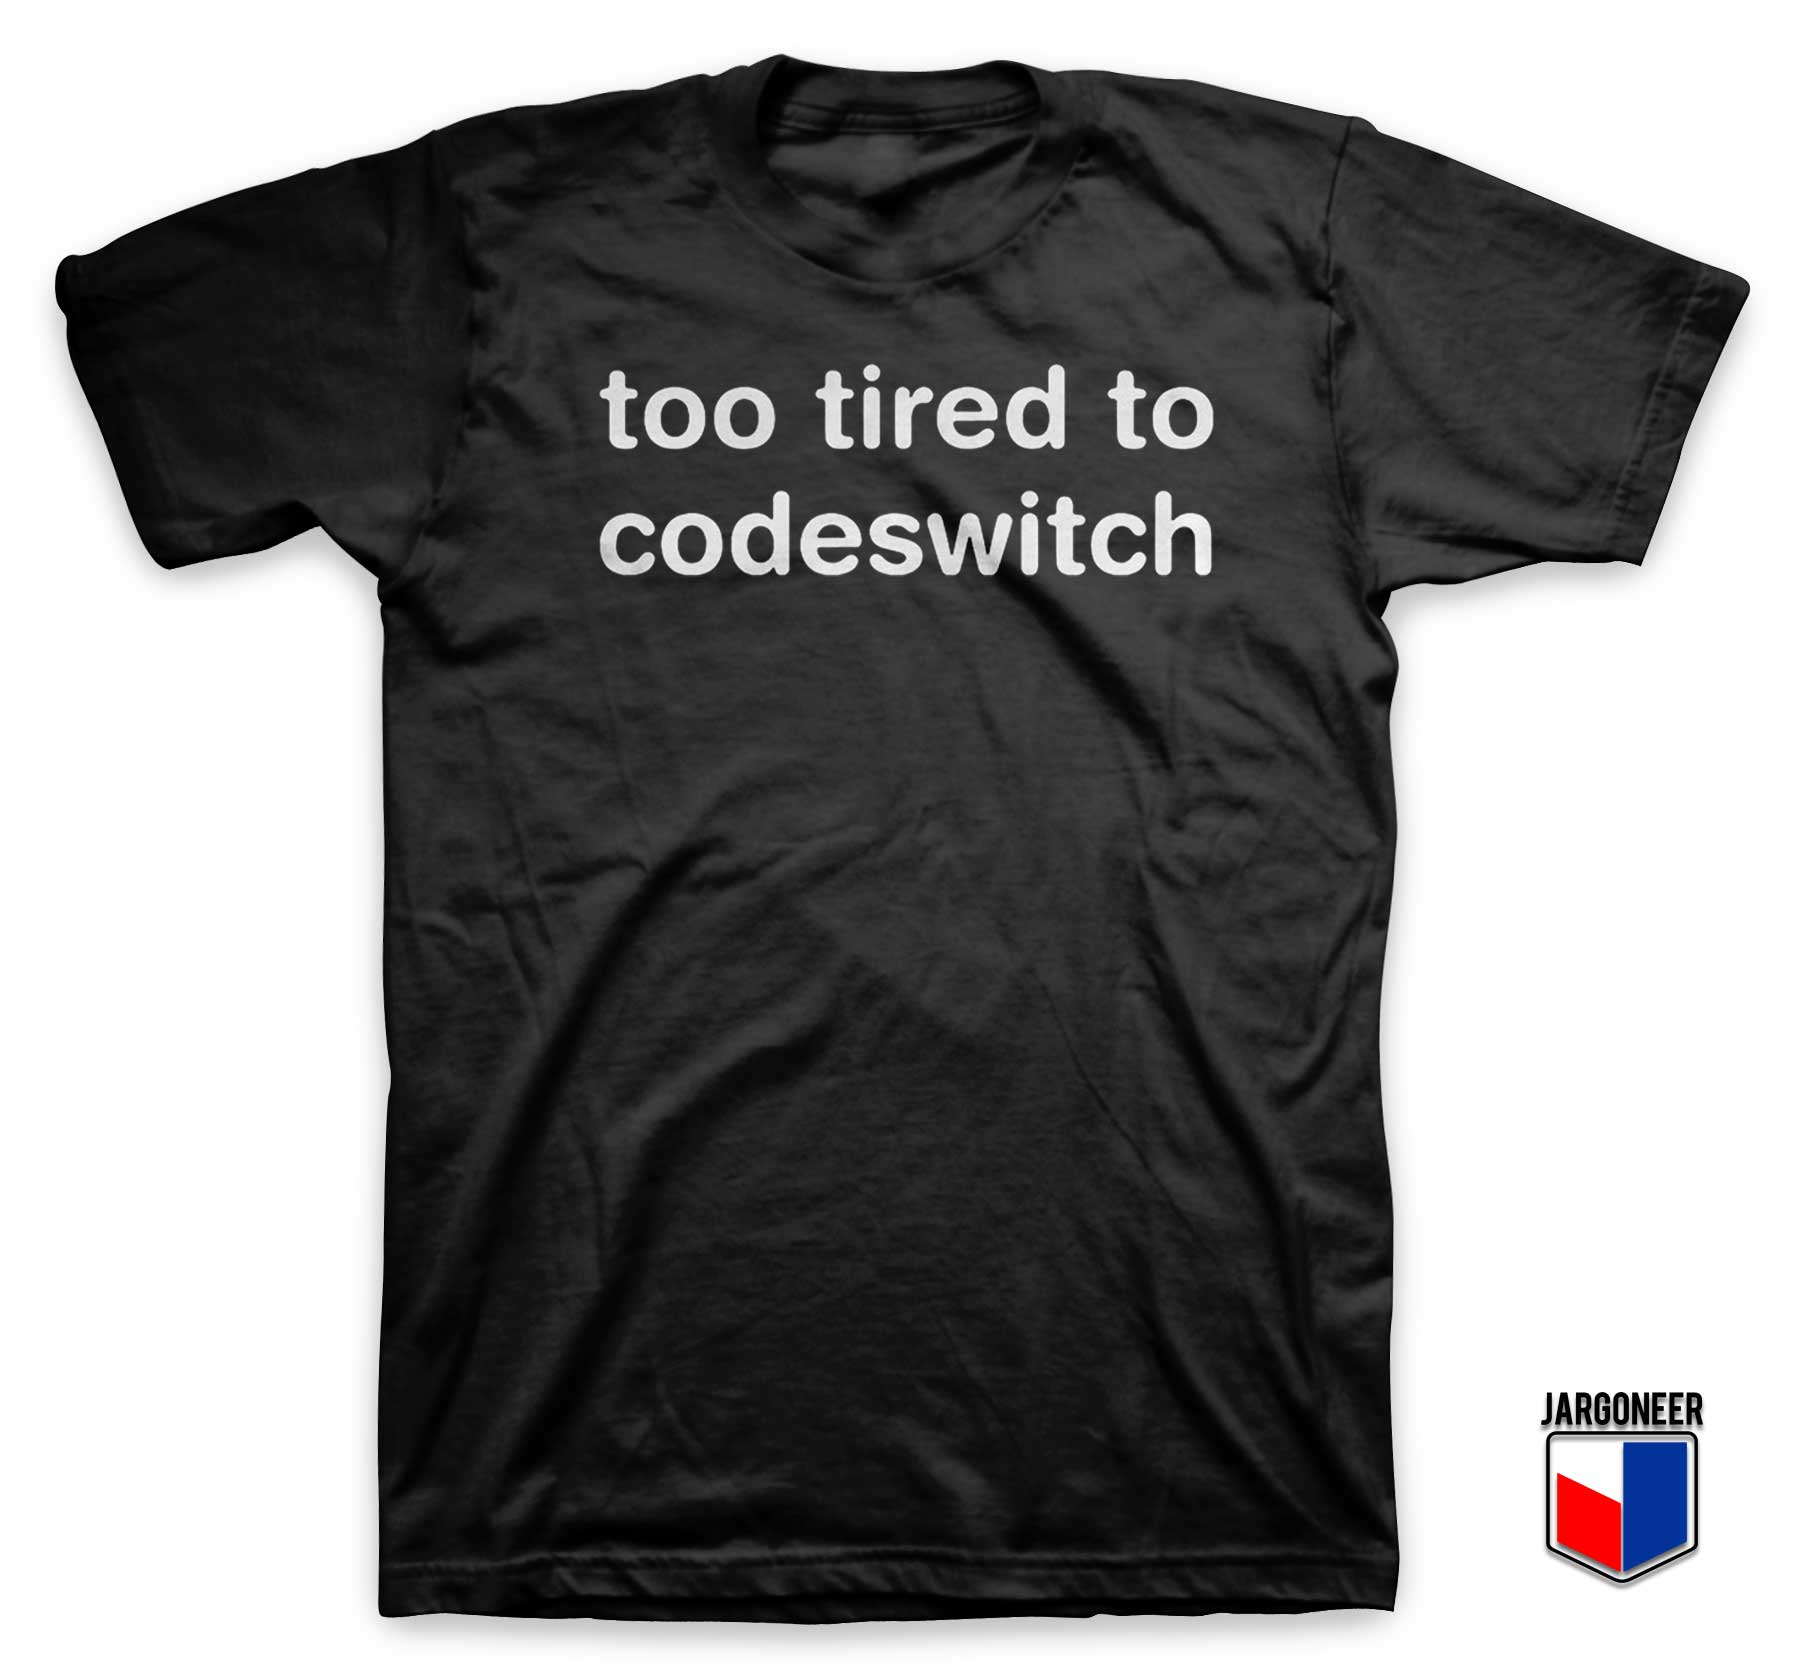 Too Tired to Codeswitch T Shirt - Shop Unique Graphic Cool Shirt Designs